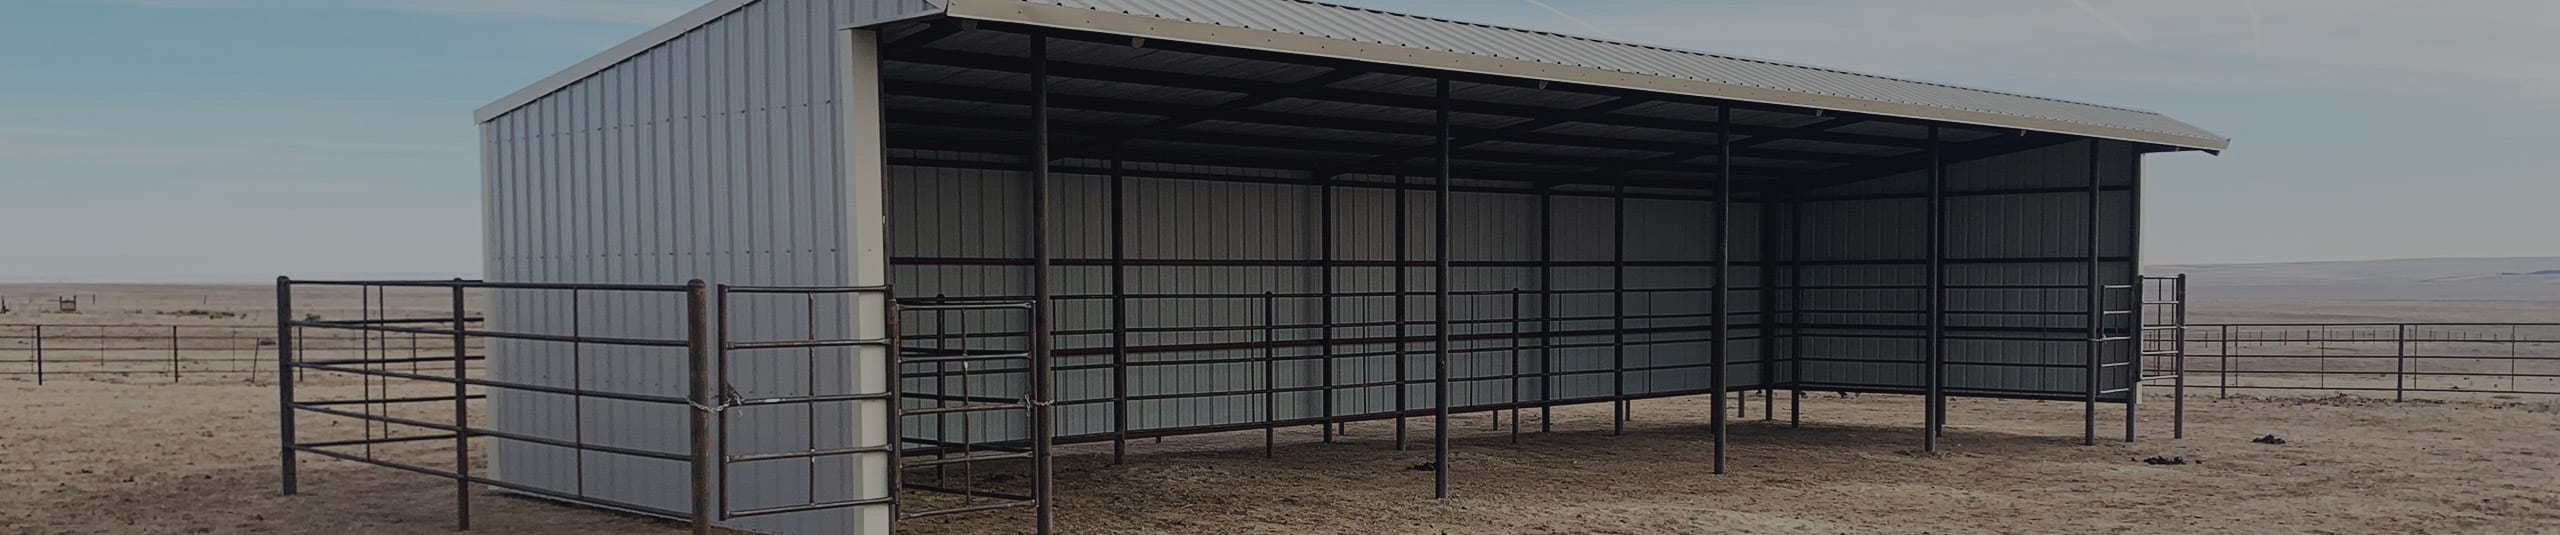 Portable run in loafing shed with steel pipe fence runs for horses in pasture.